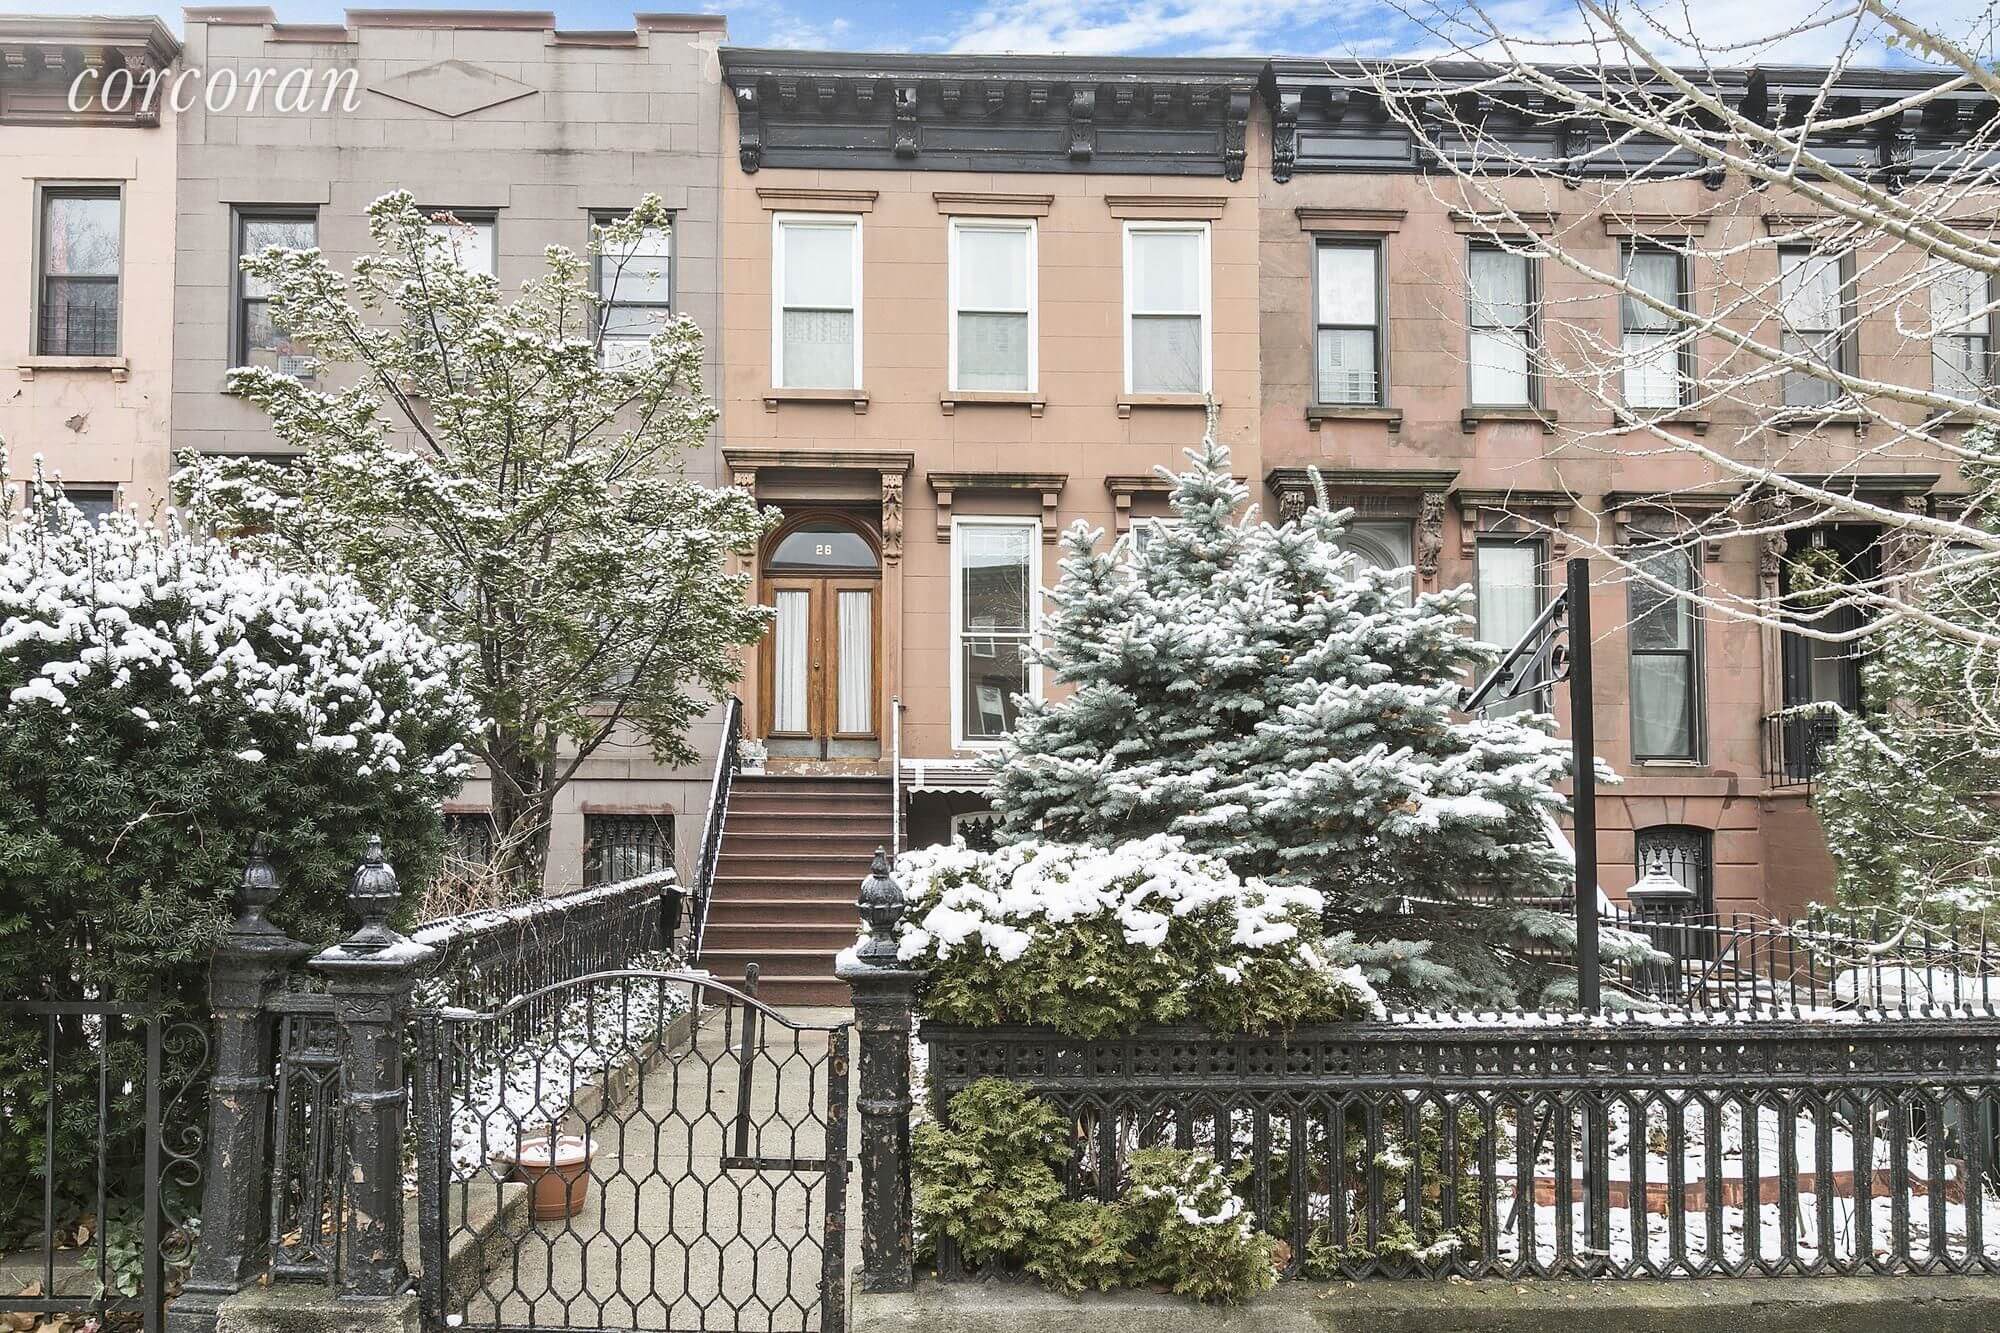 Brooklyn Homes for Sale in Carroll Gardens, Ditmas Park, Crown Heights, Cypress Hills